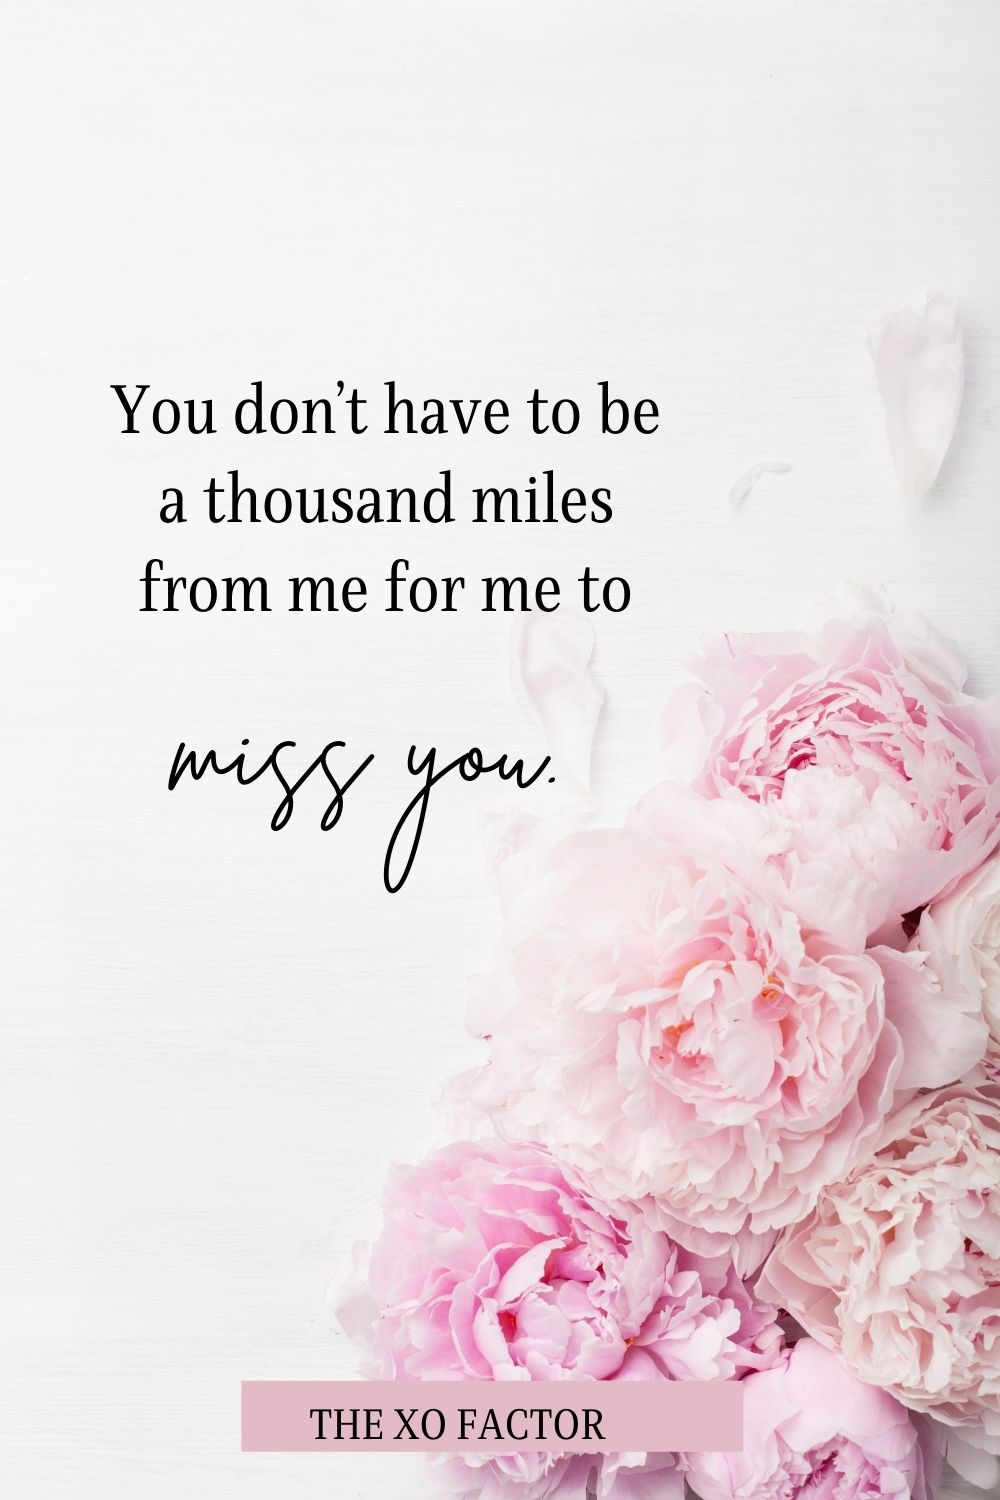 You don’t have to be a thousand miles from me for me to miss you.